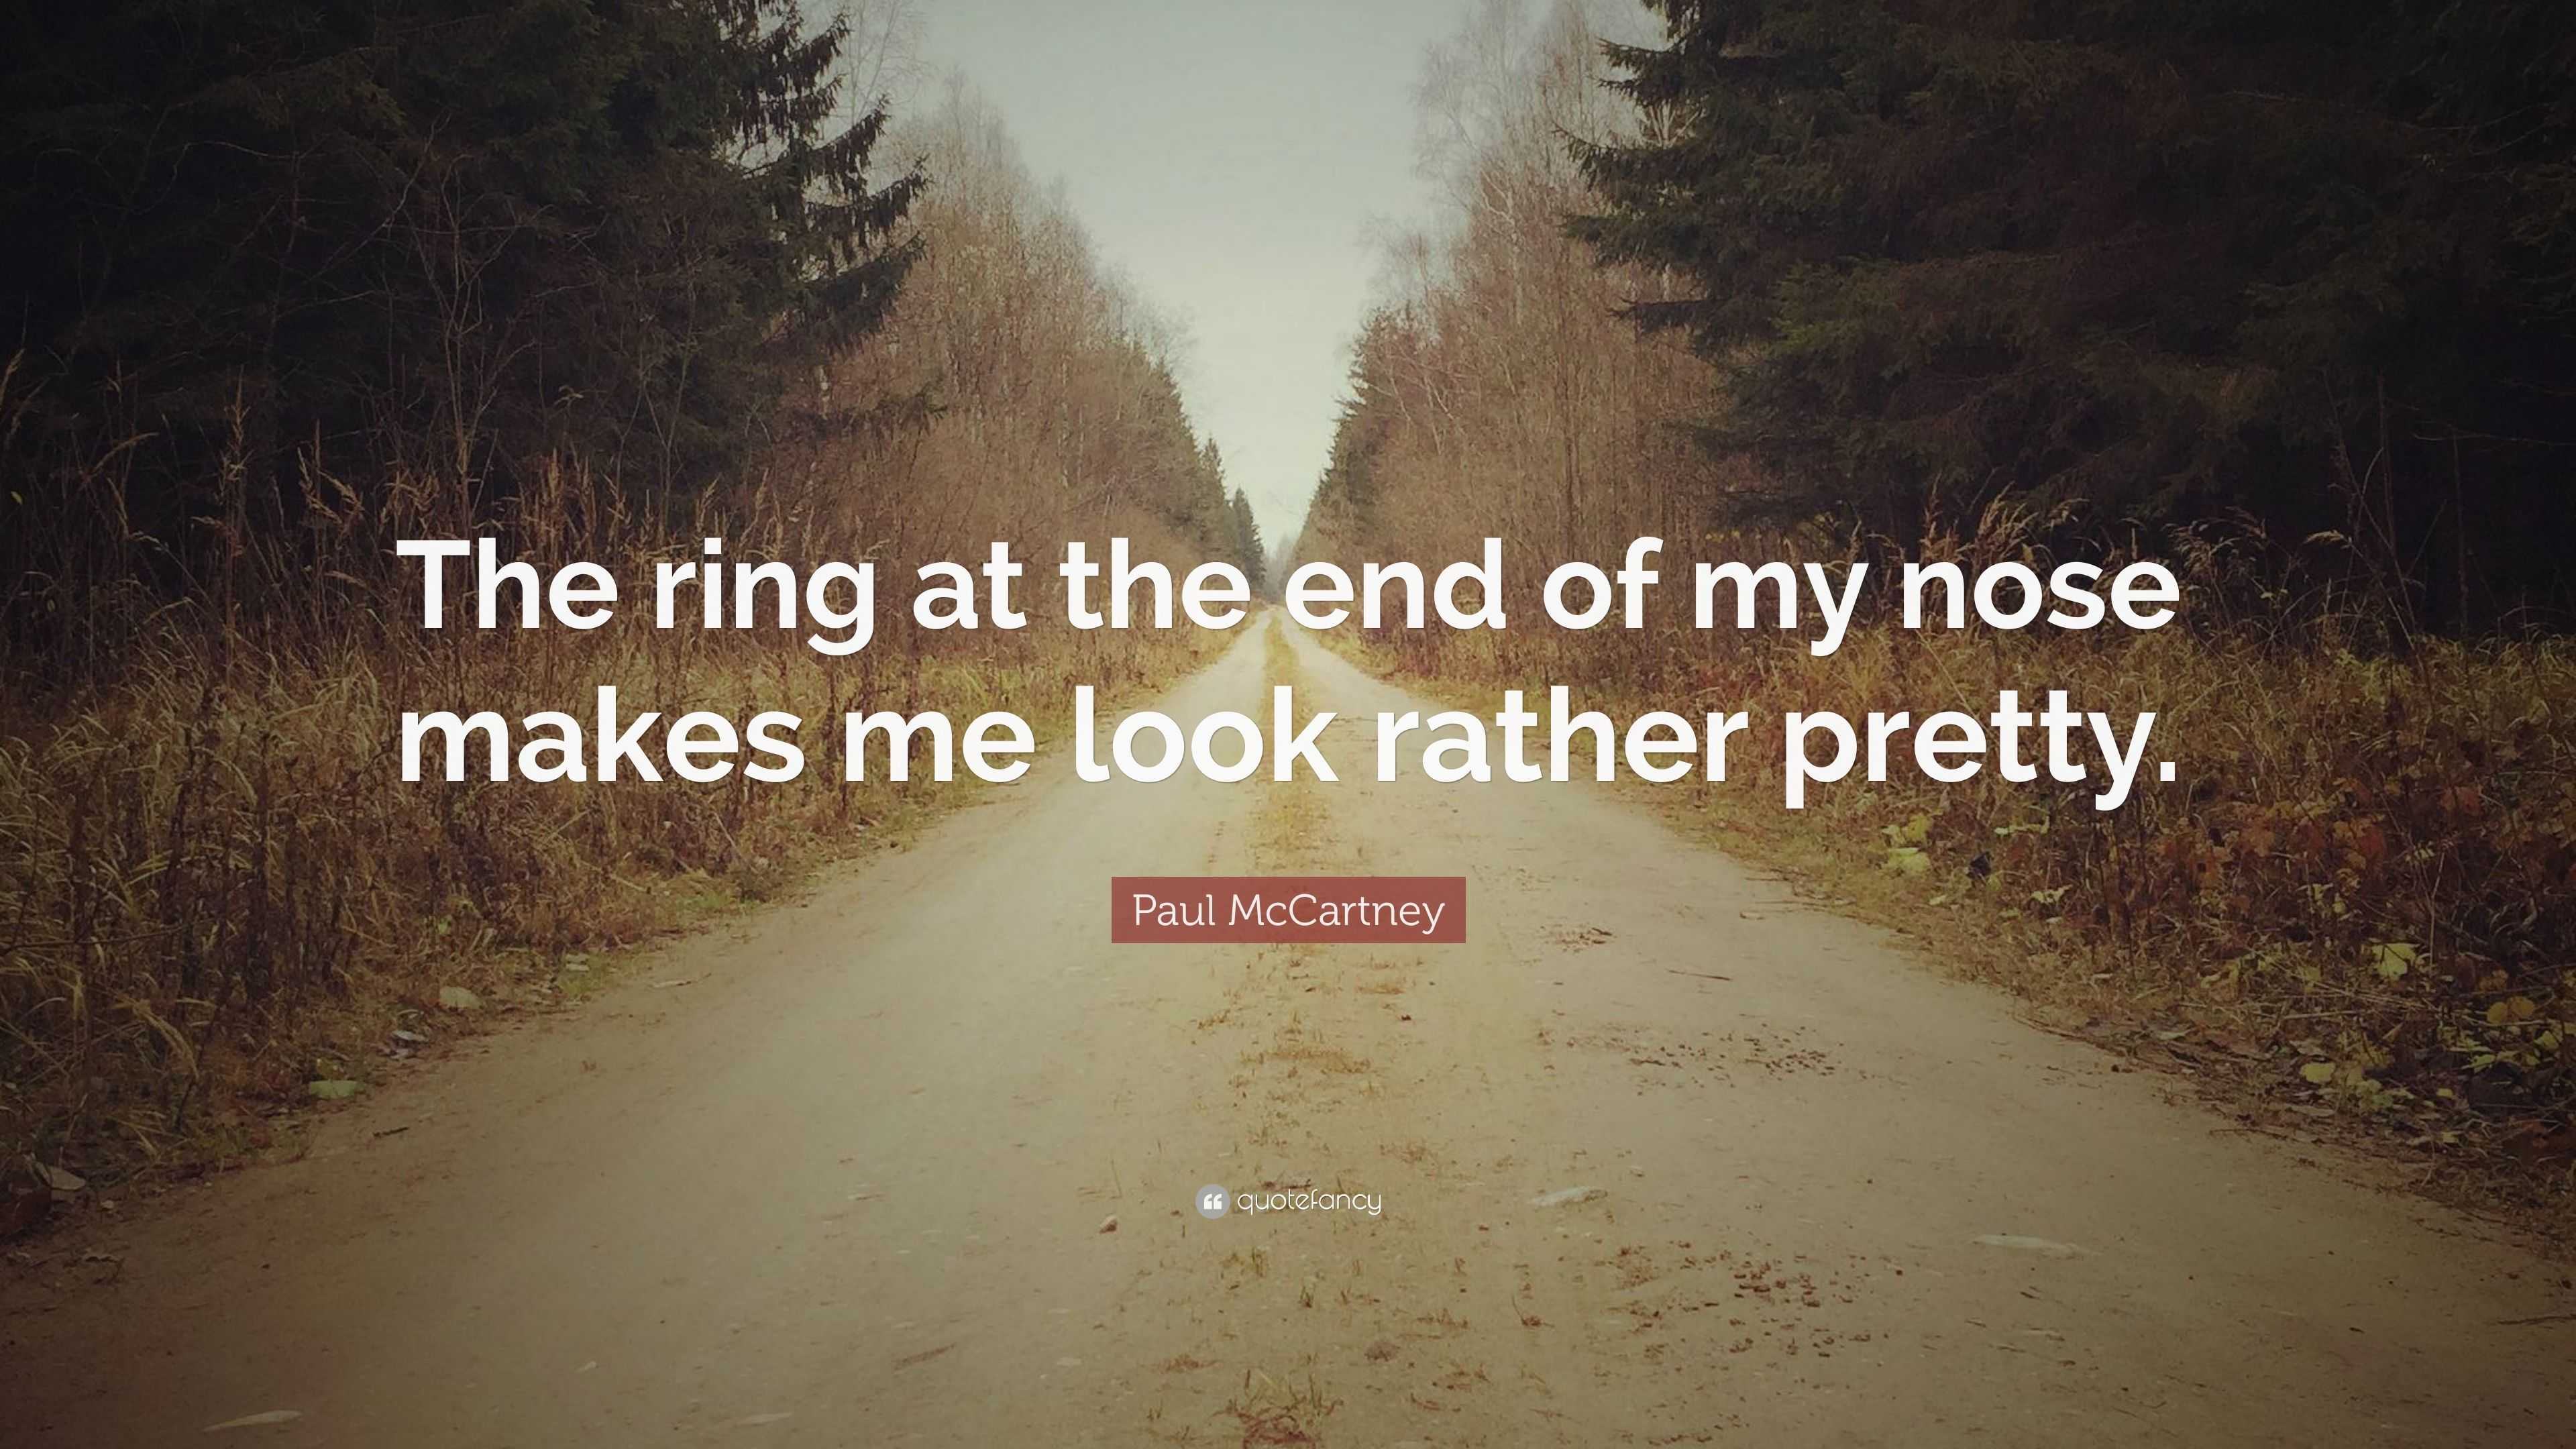 4950302 Paul McCartney Quote The ring at the end of my nose makes me look